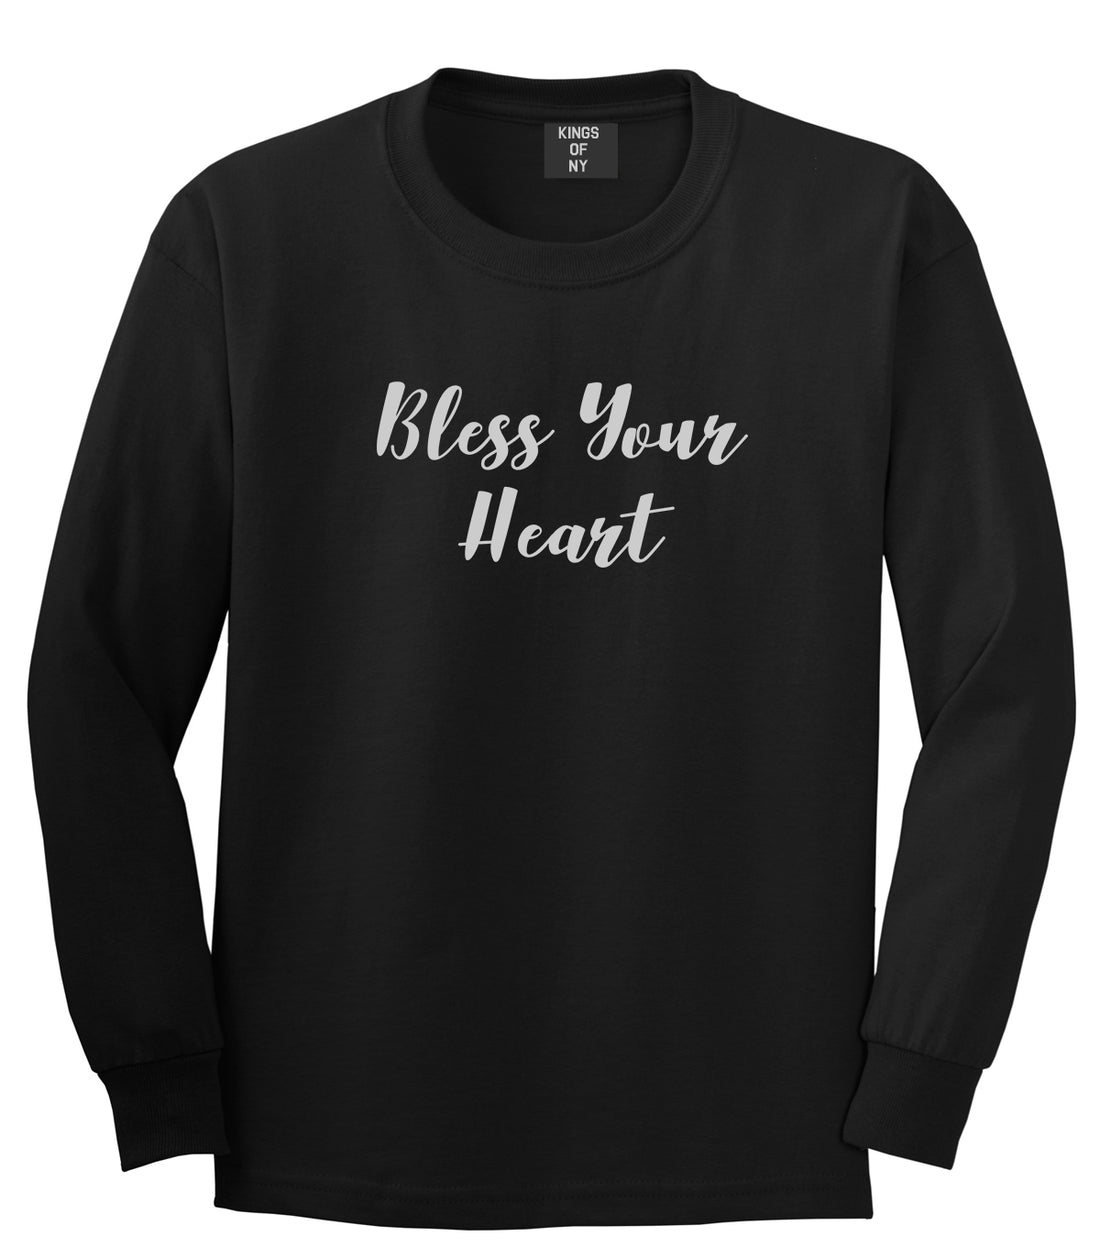 Bless Your Heart Black Long Sleeve T-Shirt by Kings Of NY